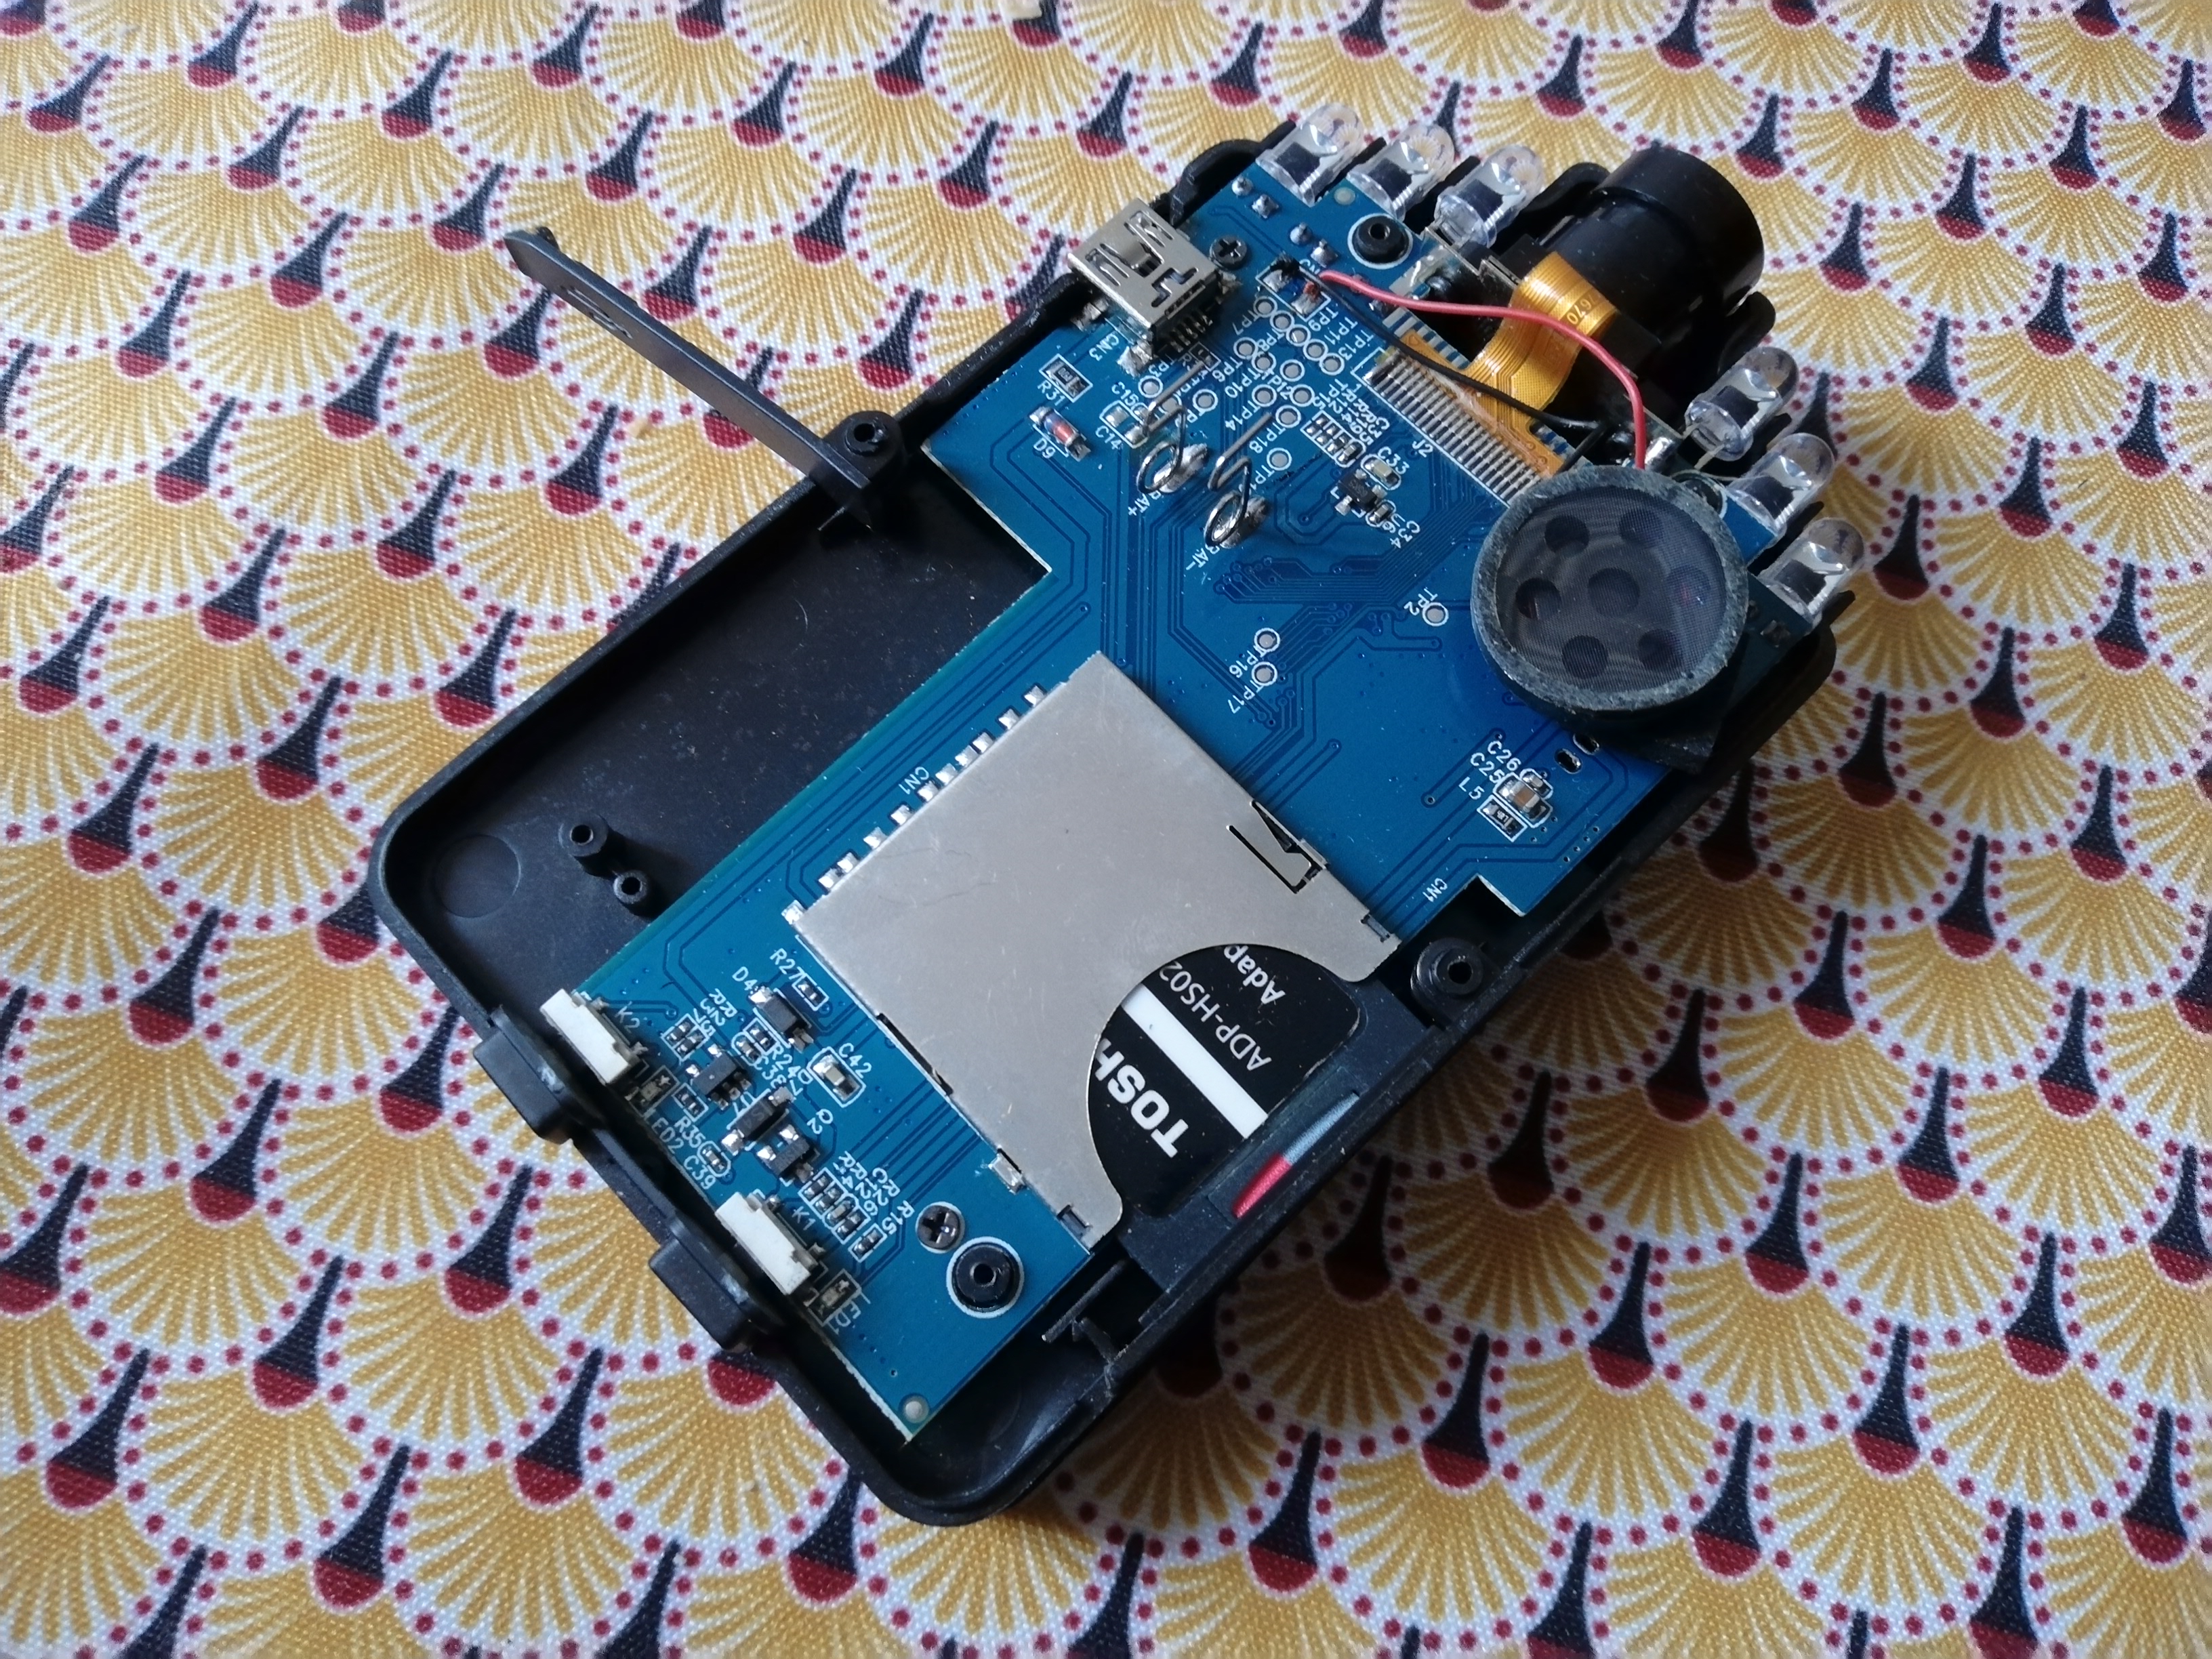 The on-board camera whose USB port needed soldering